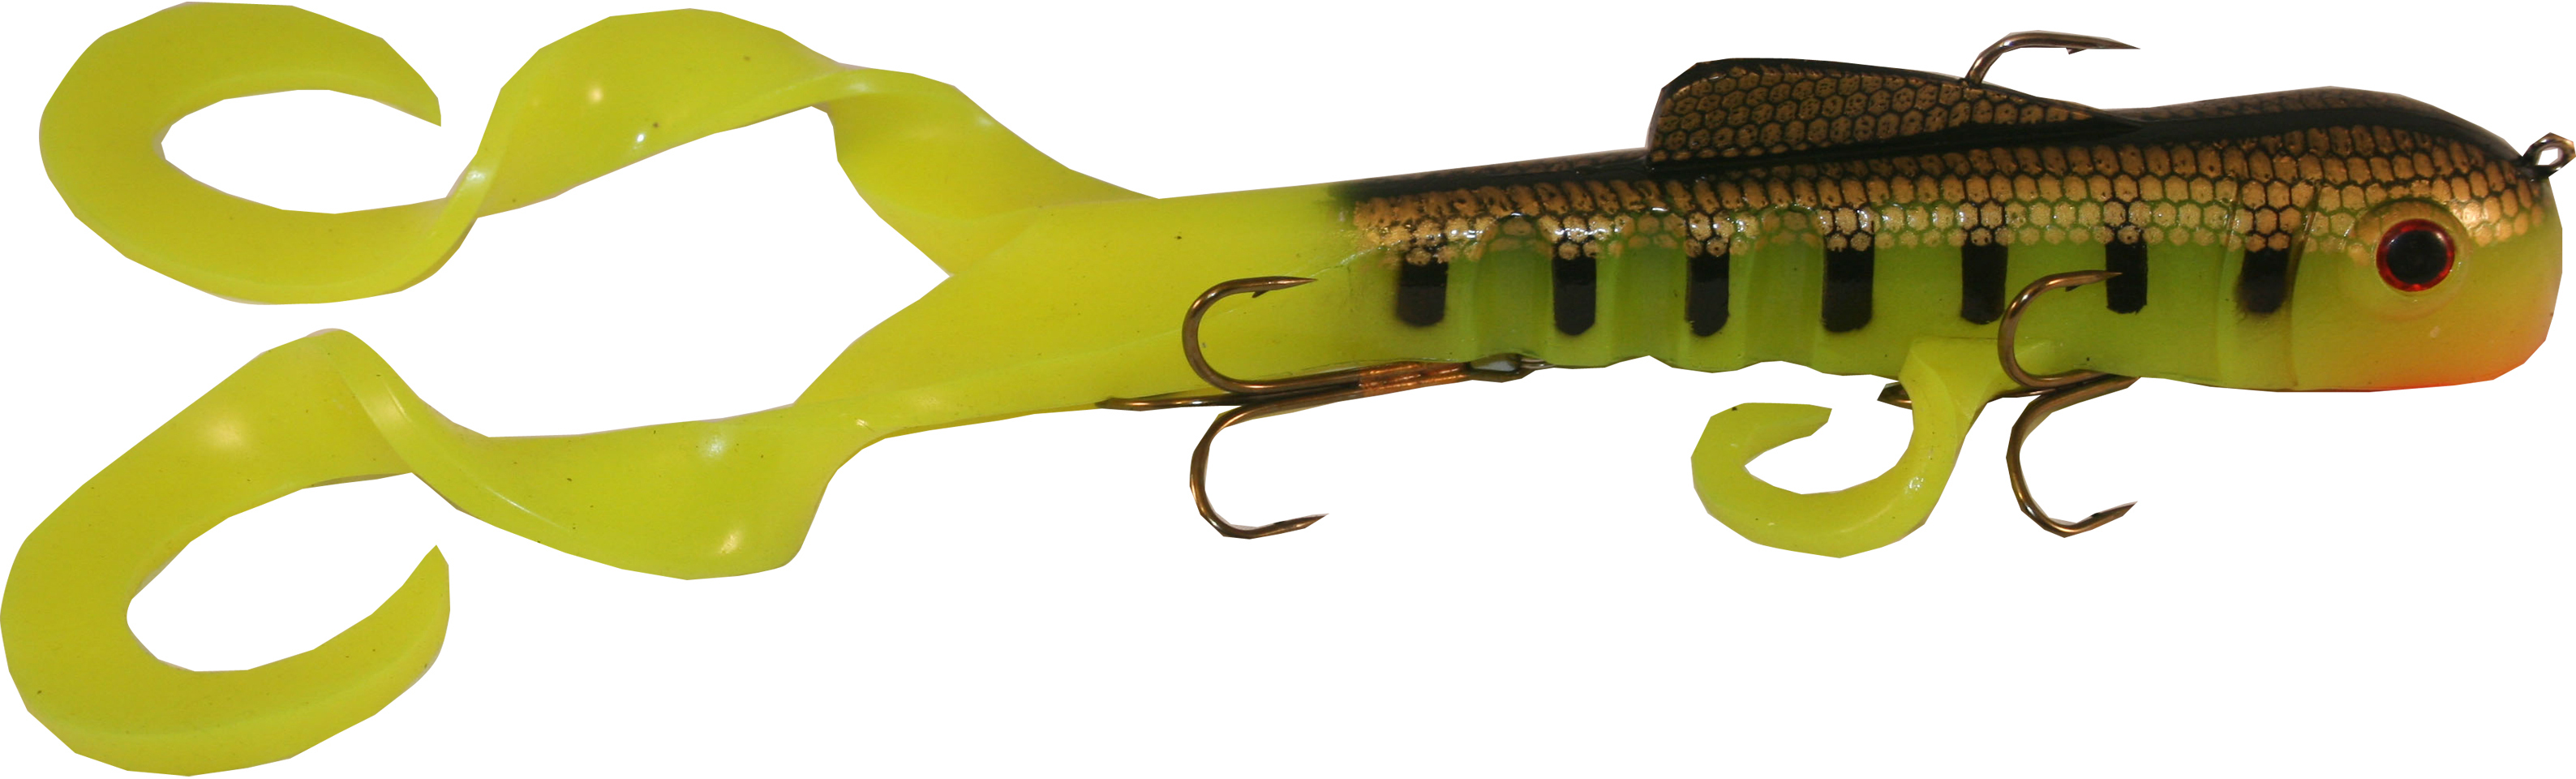 Musky Innovations Magnum Double Dawg